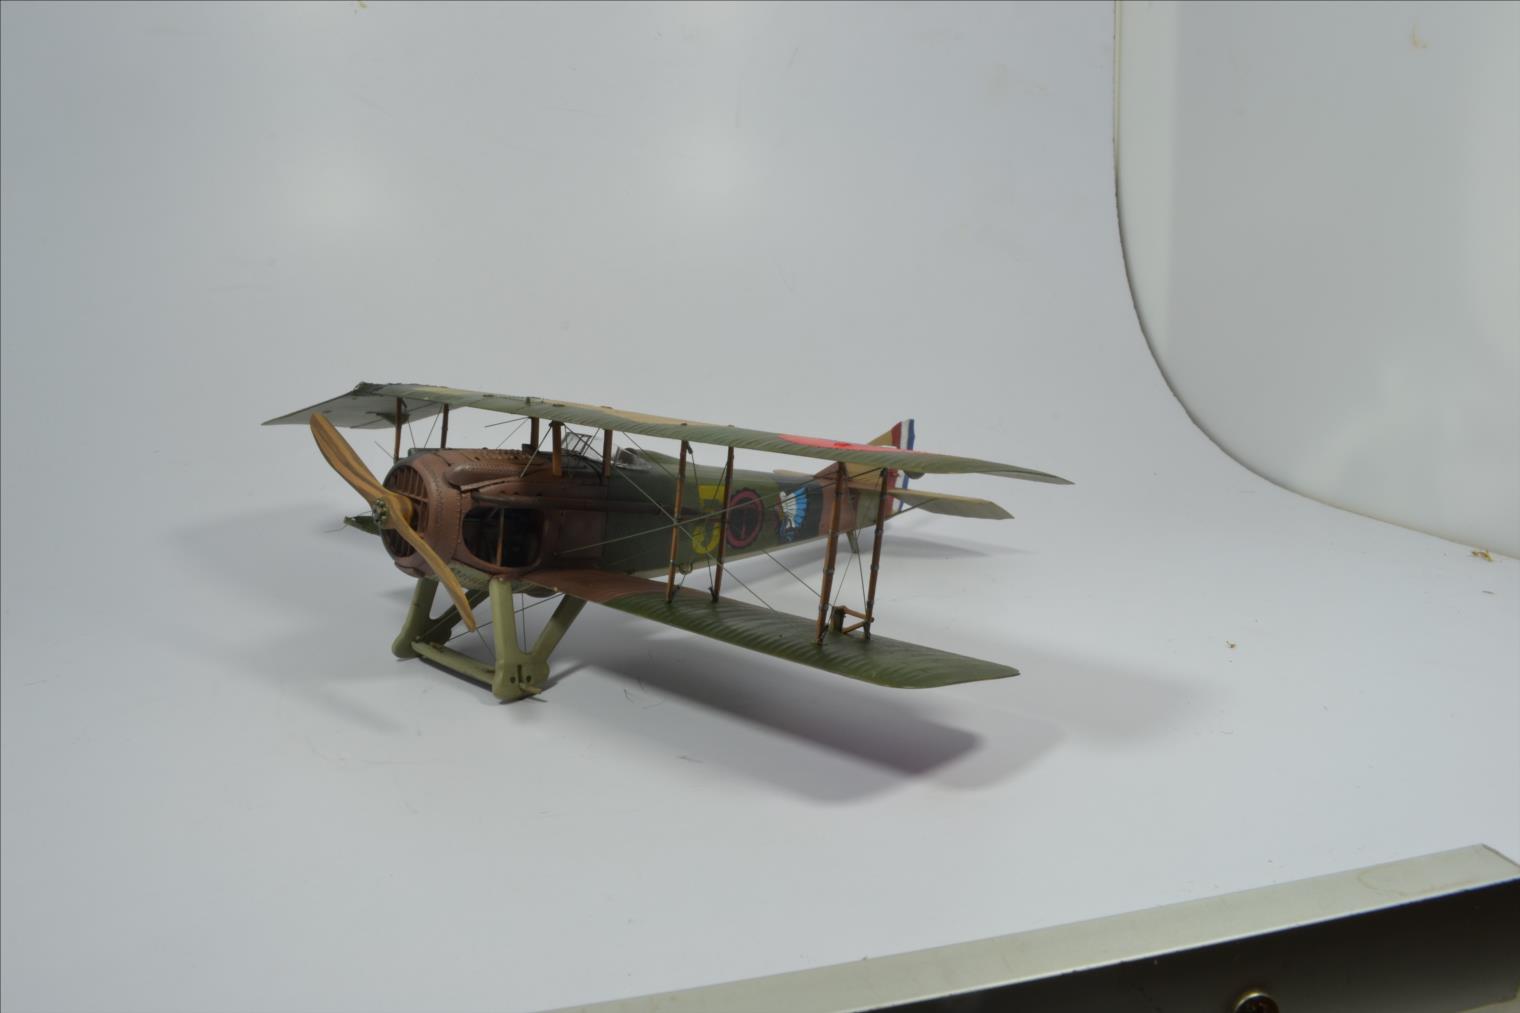 SPAD VIIc1 (RODEN 1/32) - Page 4 21032307592222494217331228